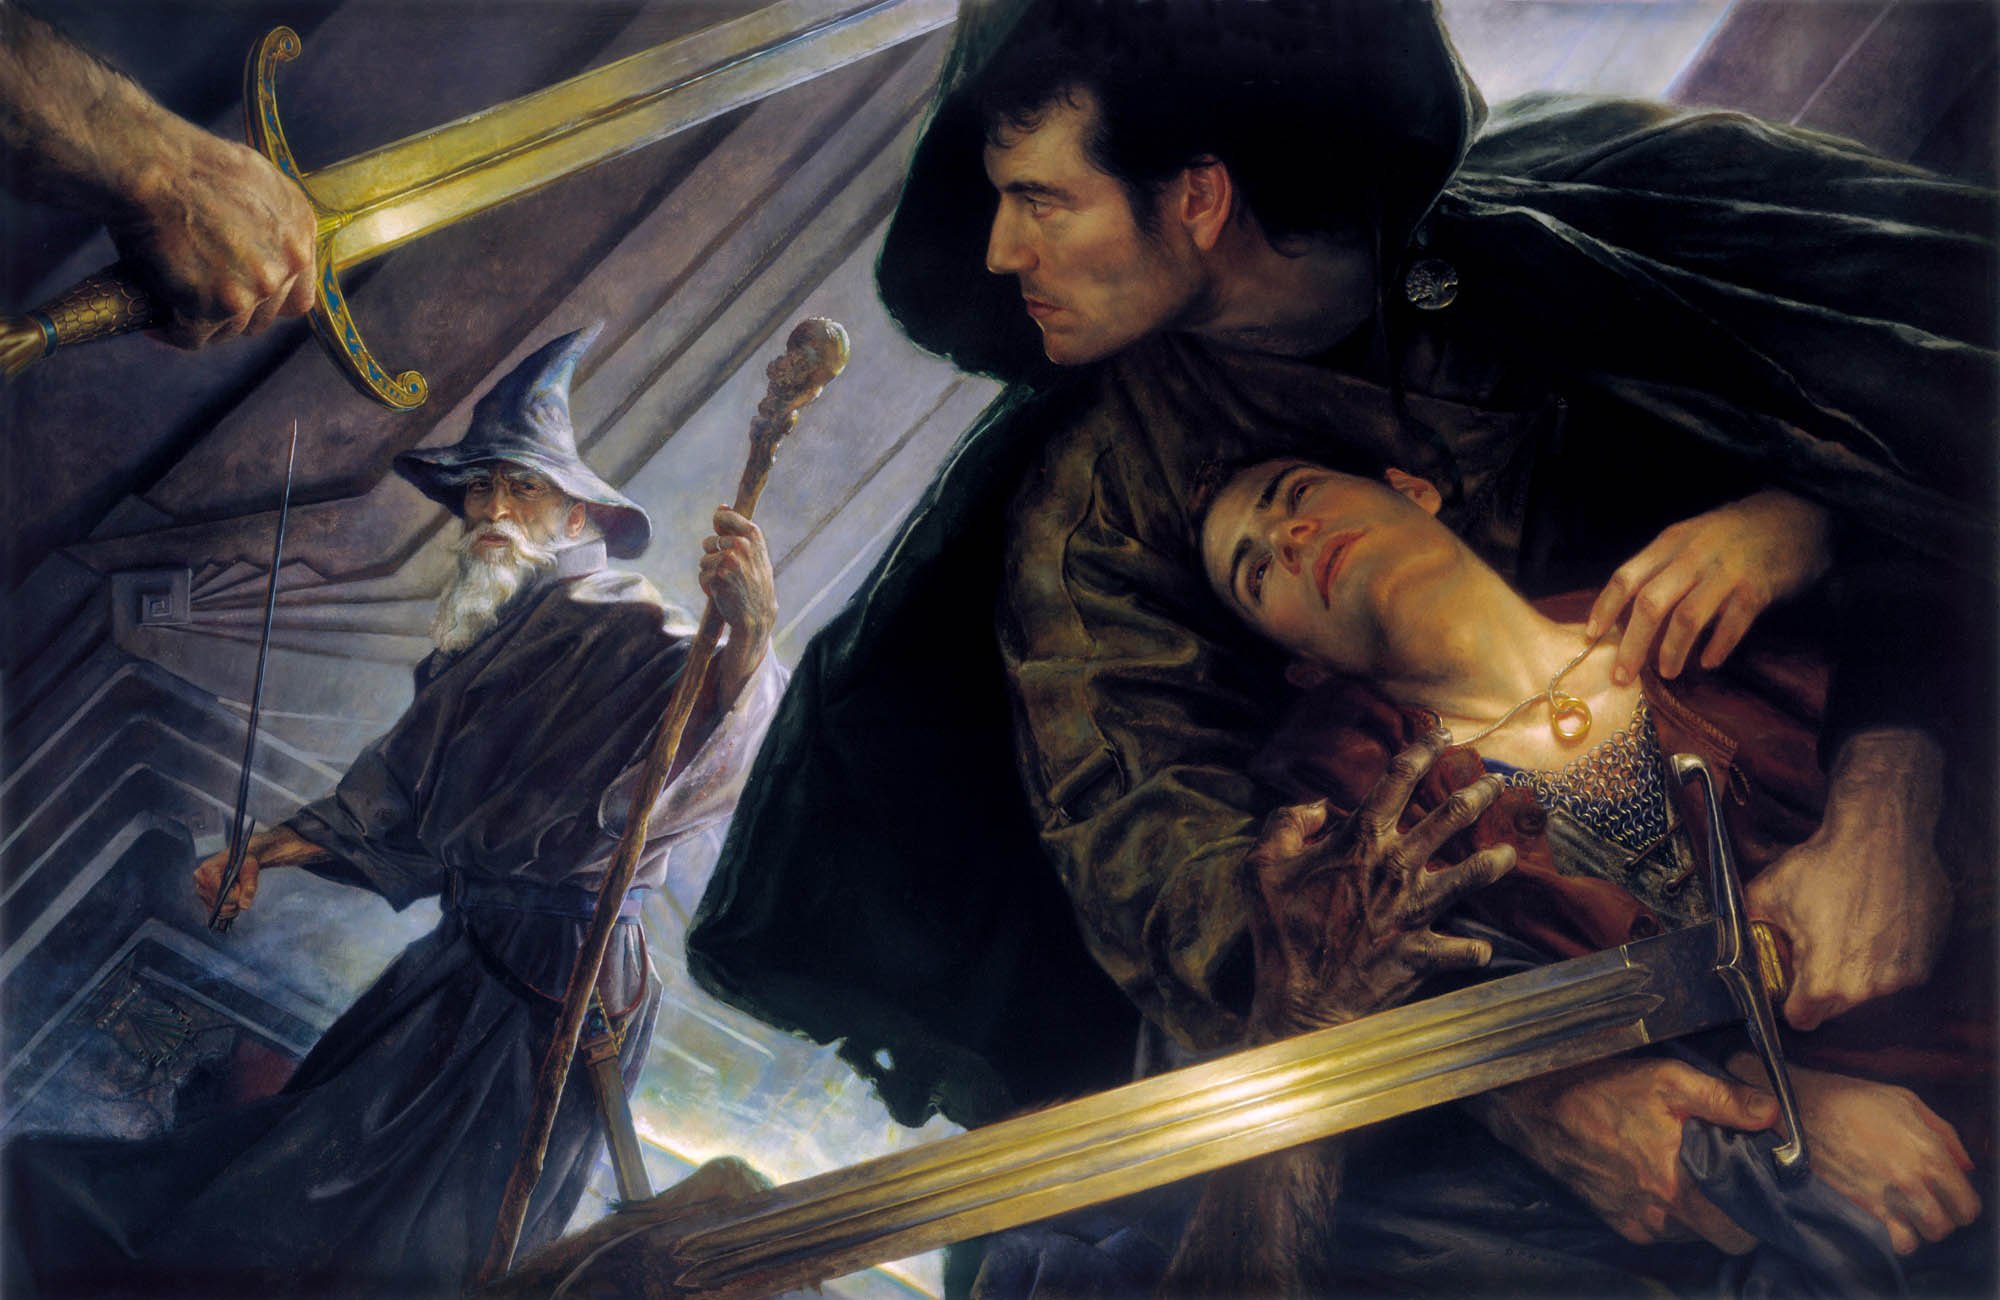 THE LORD OF THE RINGS
cover art for the Science Fiction Book Club edition of the novels by J.R.R. Tolkien
55" x 33" Oil on Panel 1999
 collection of Chris Huntley
